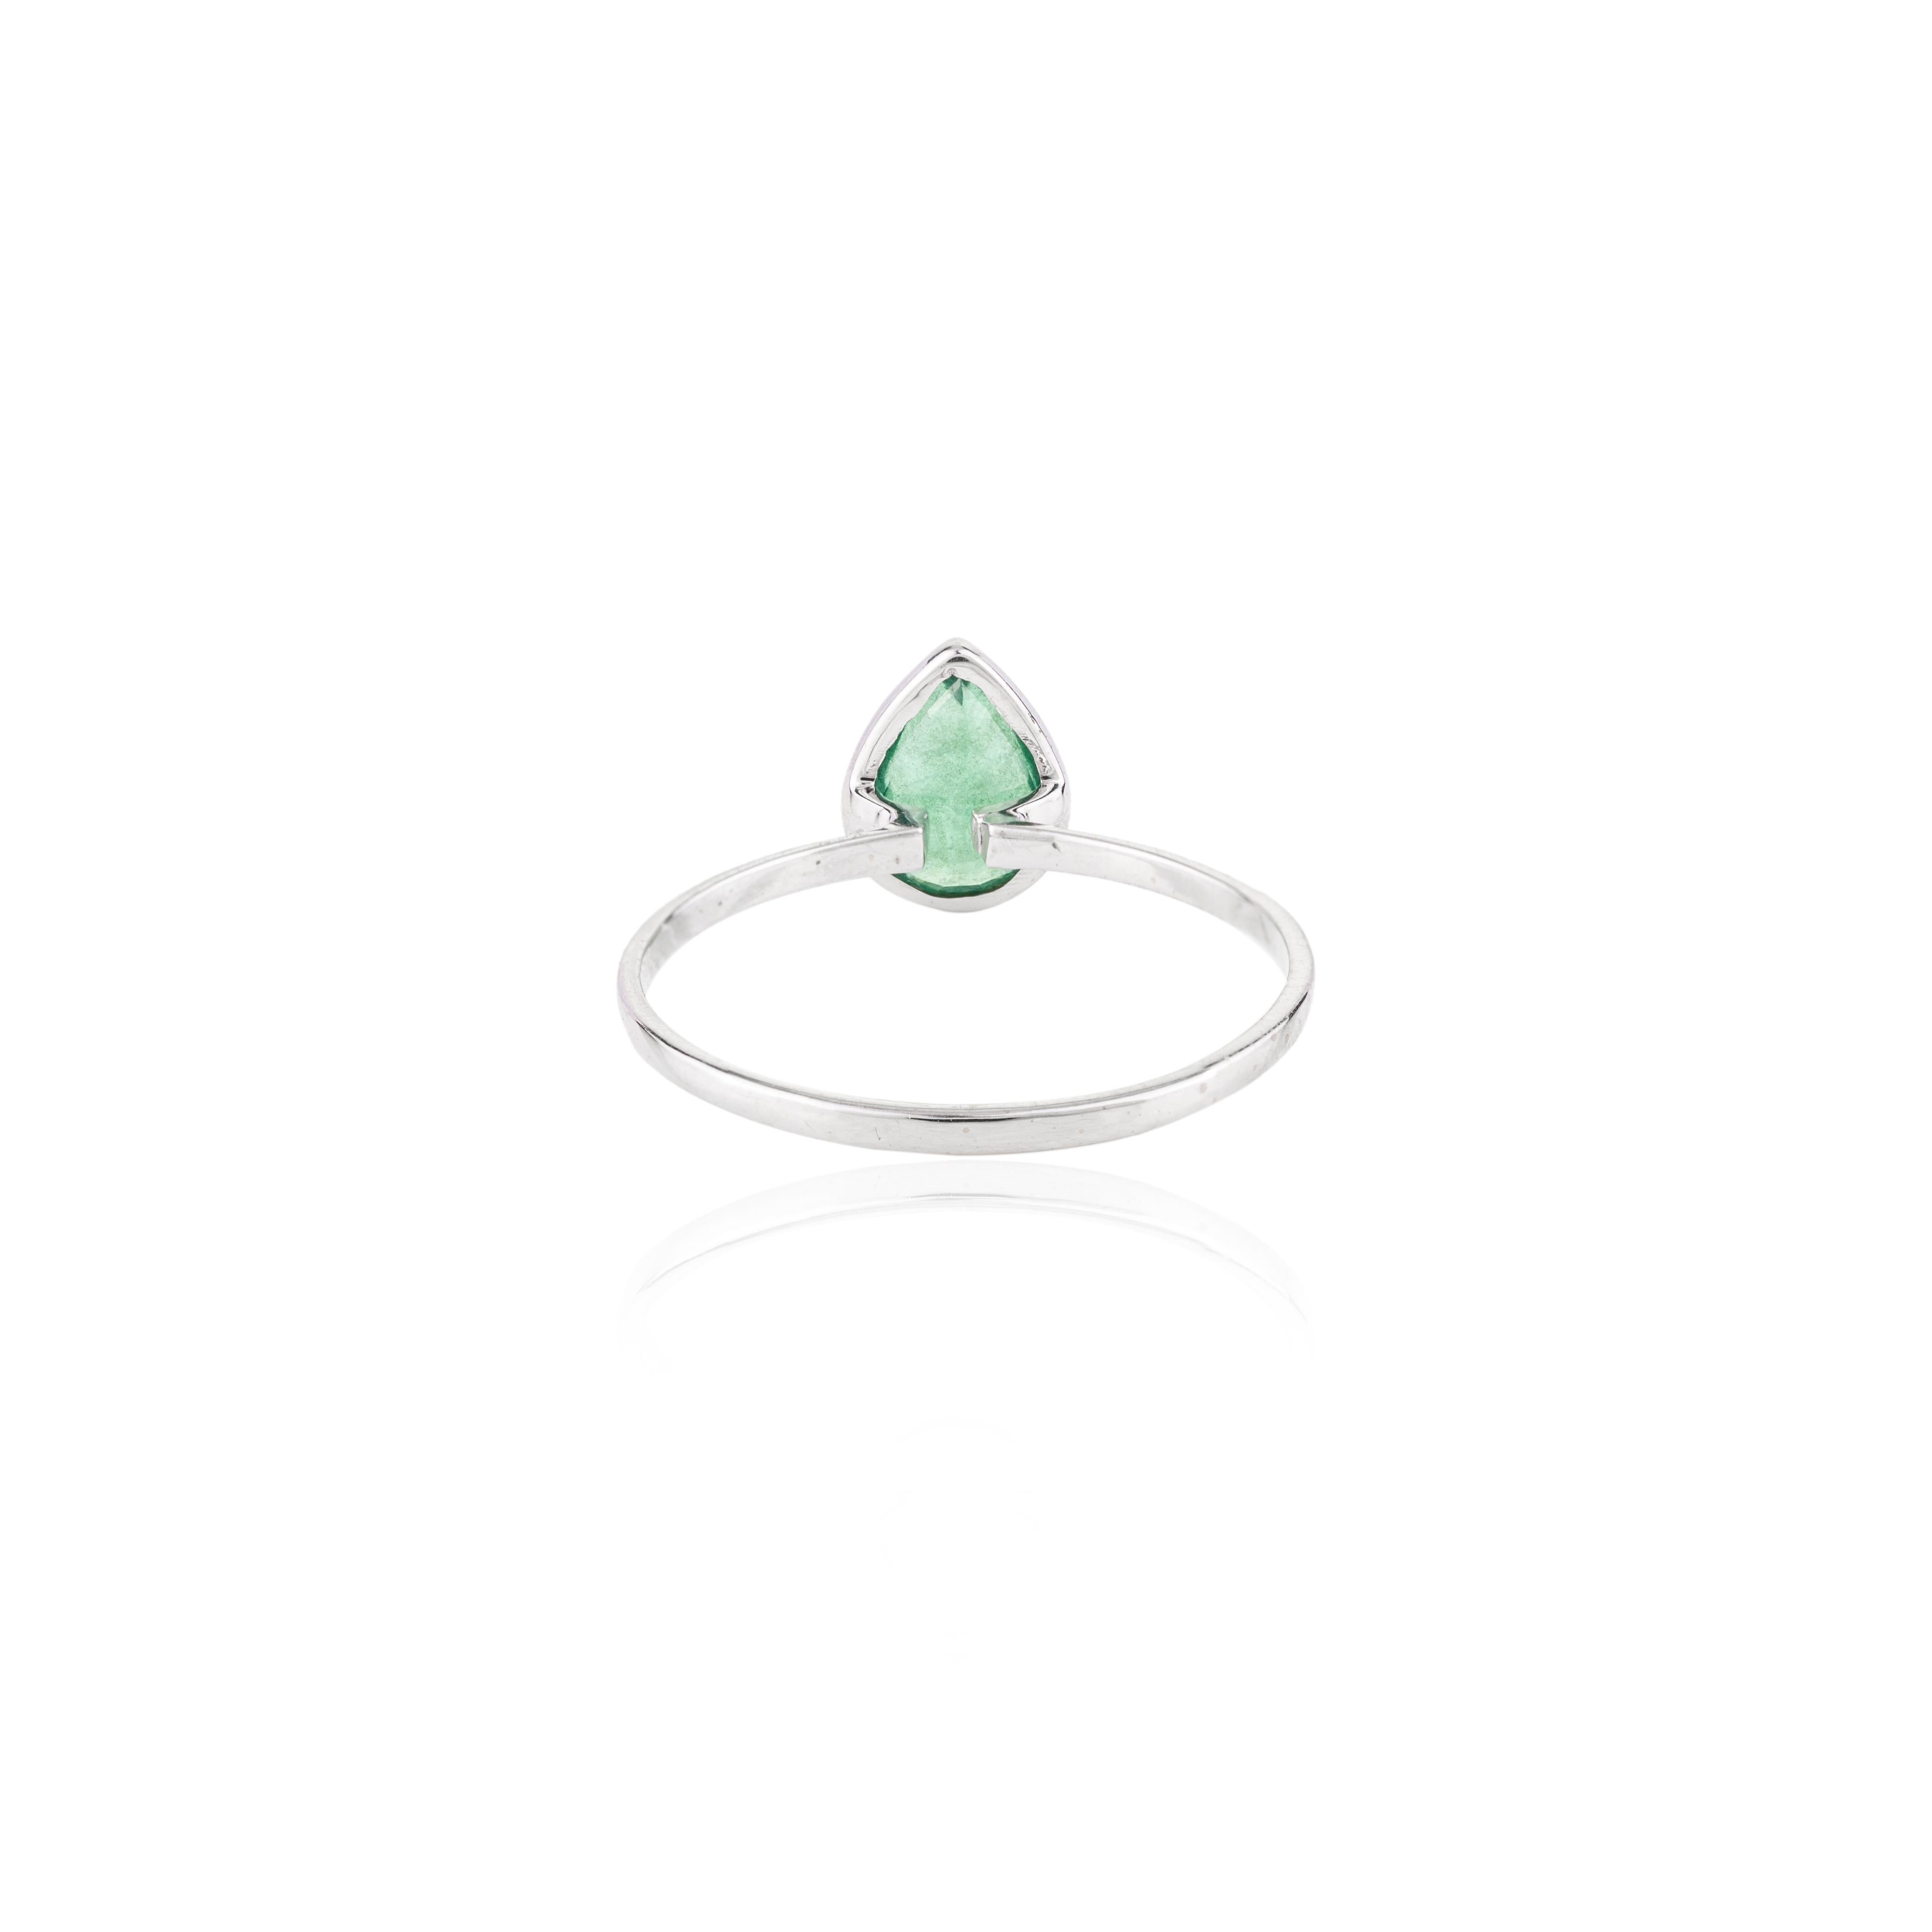 For Sale:  Natural Pear Cut Emerald Birthstone Ring Bezel Set in 18k White Gold Settings 7